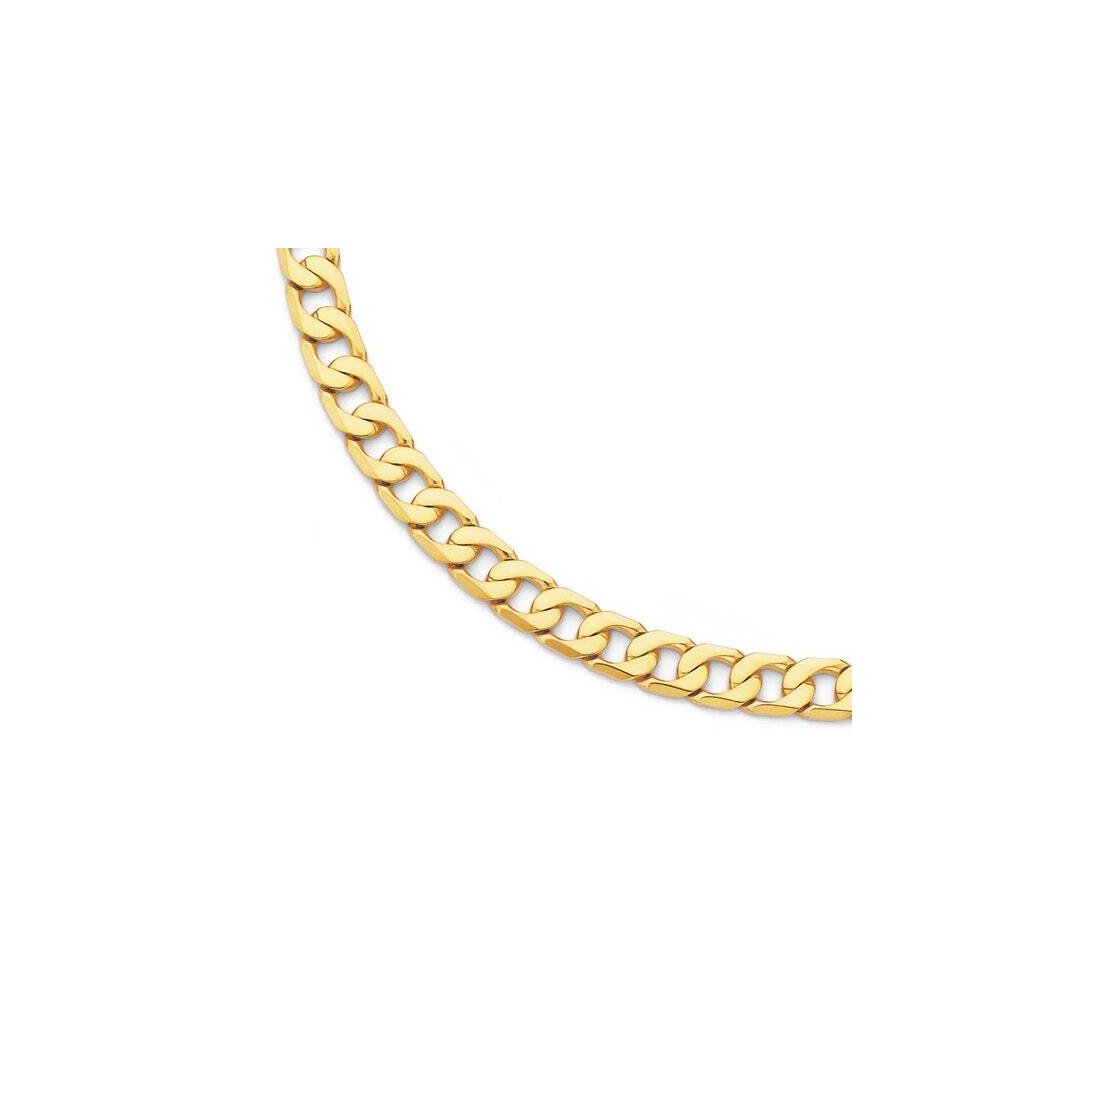 11MM Yellow Gold Flat Curb Chain .925 Solid Sterling Silver Sizes 8-28"